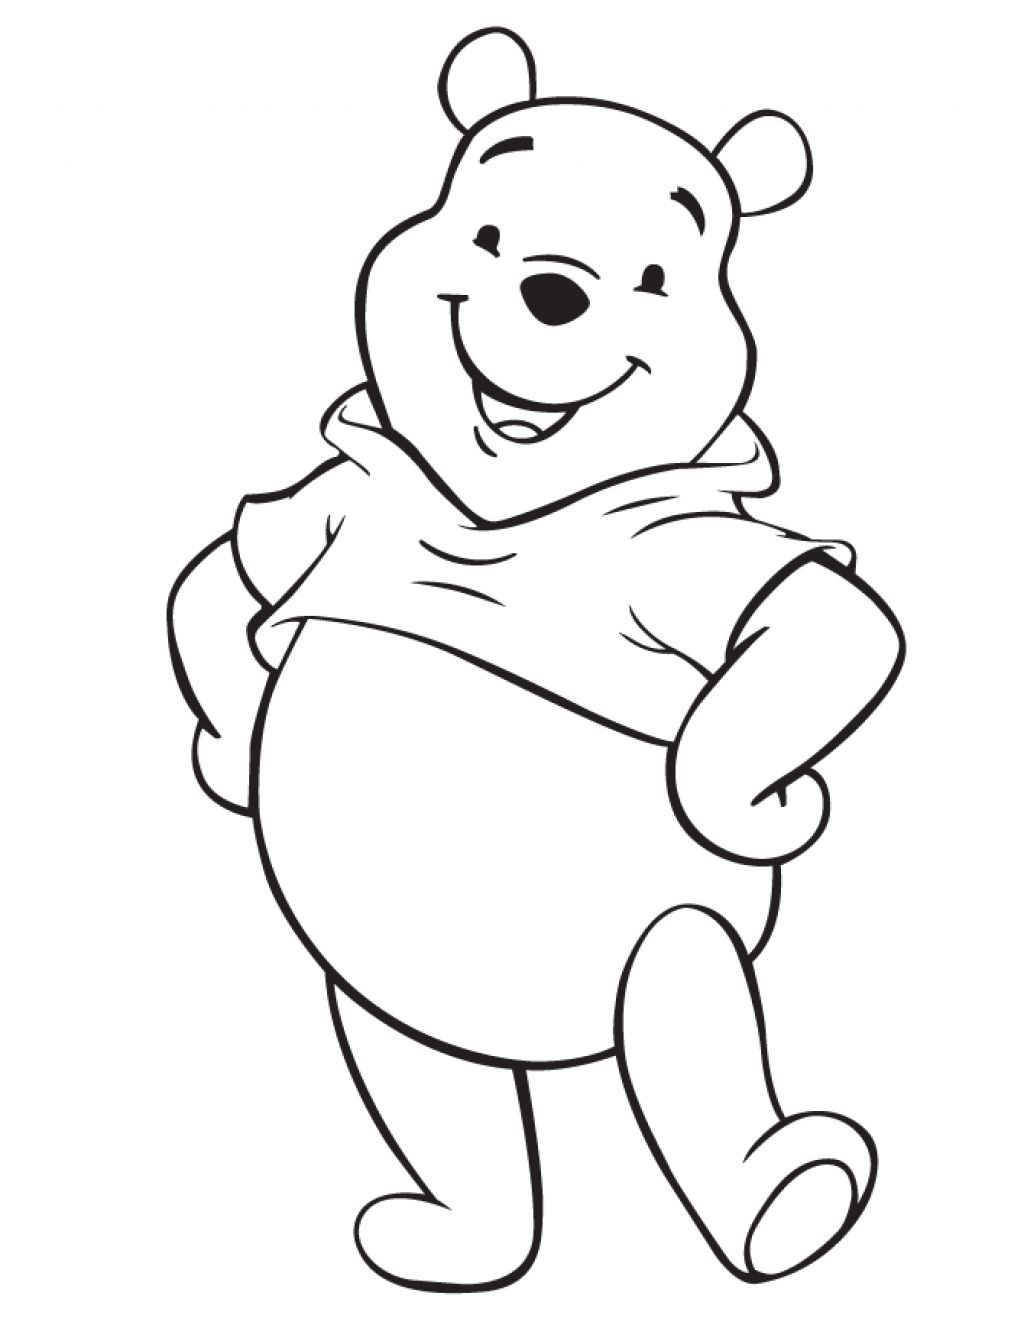 Disney Characters Coloring Pages Easy Baby Disney Cartoon Characters - Free Printable Coloring Pages Of Disney Characters